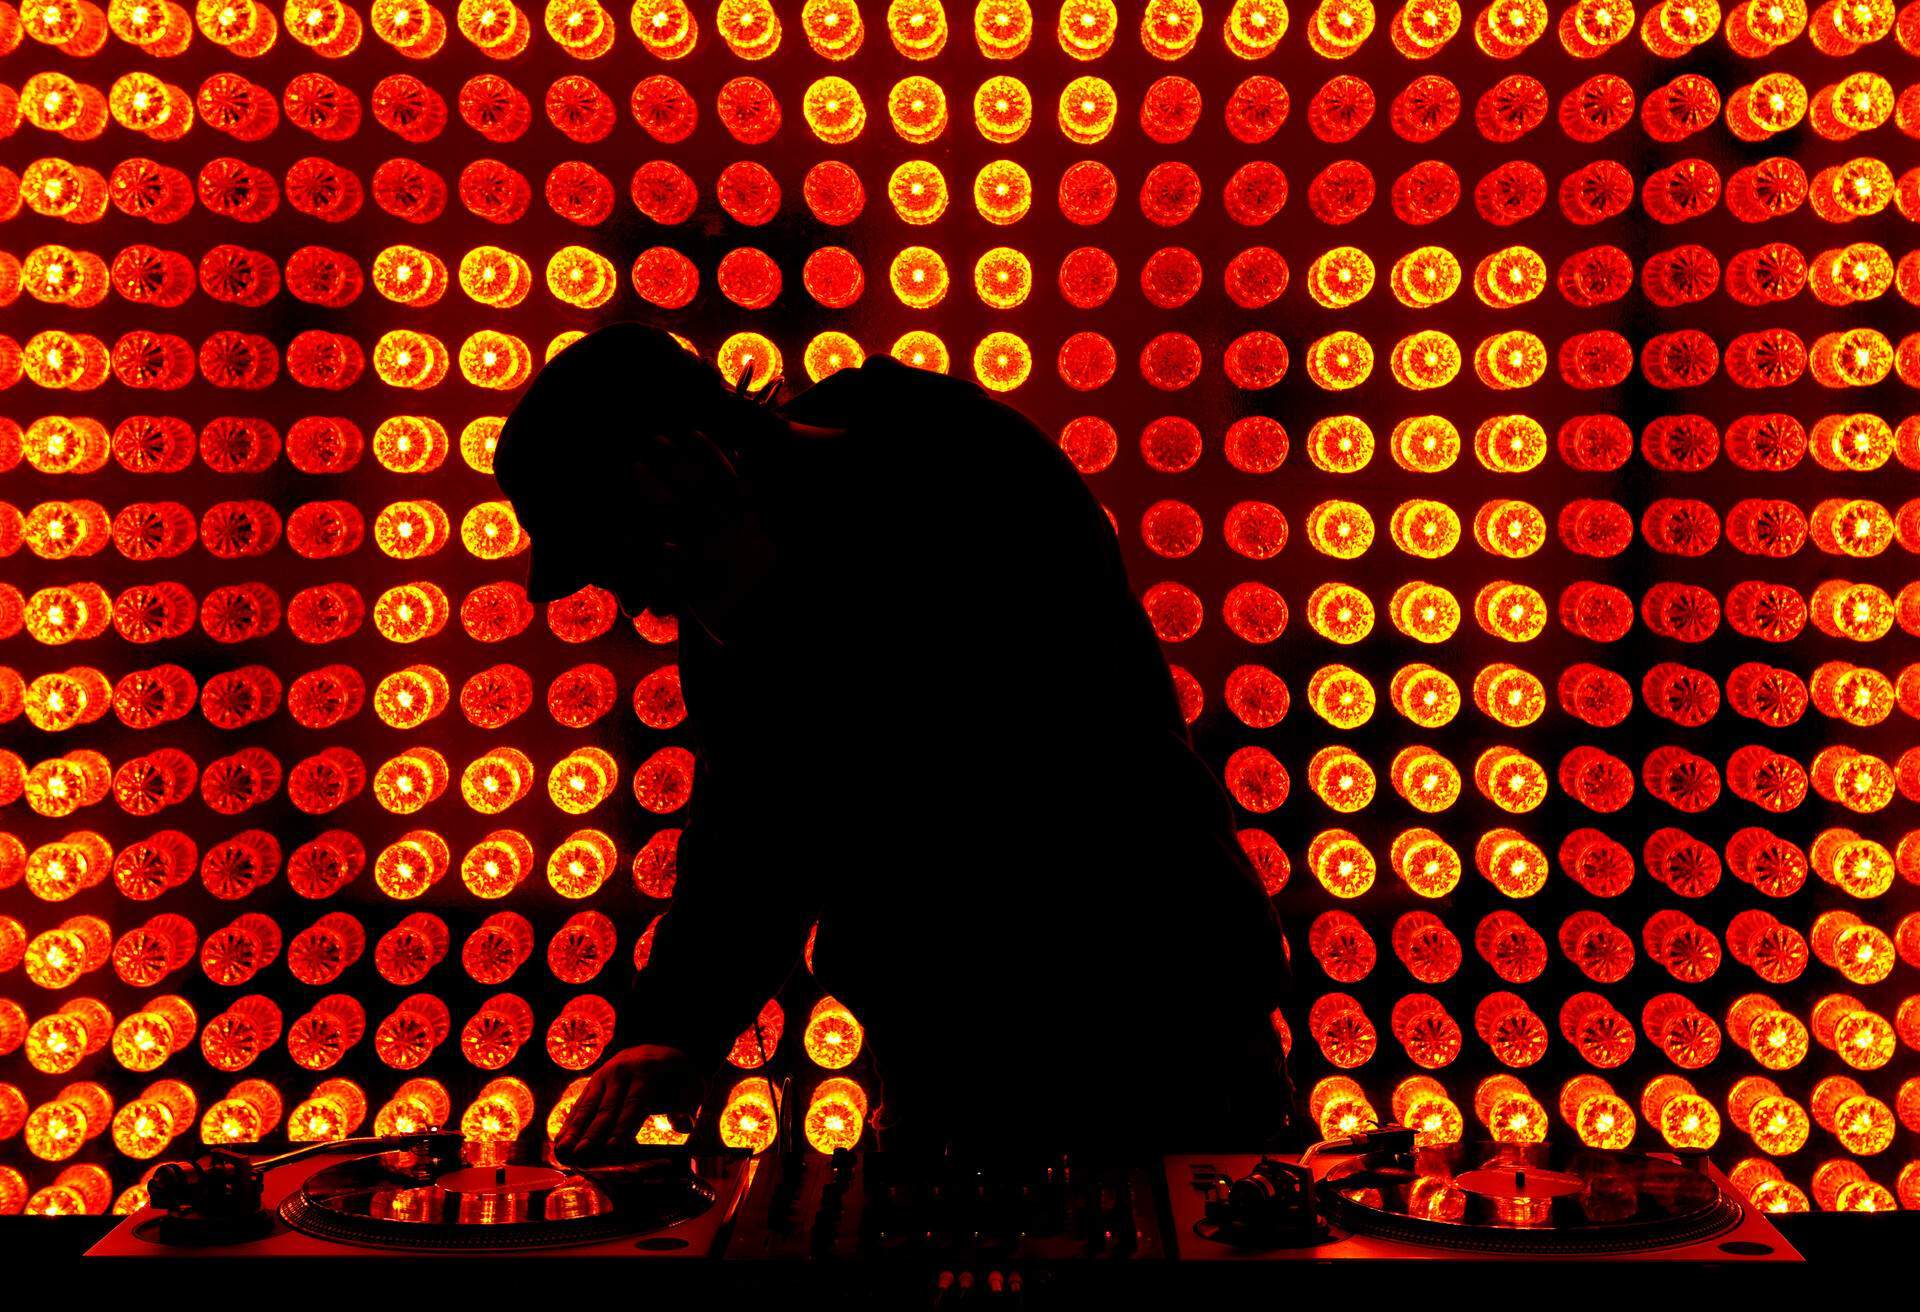 A silhouette of a DJ scratching a vinyl record with a colourful background of round lights.